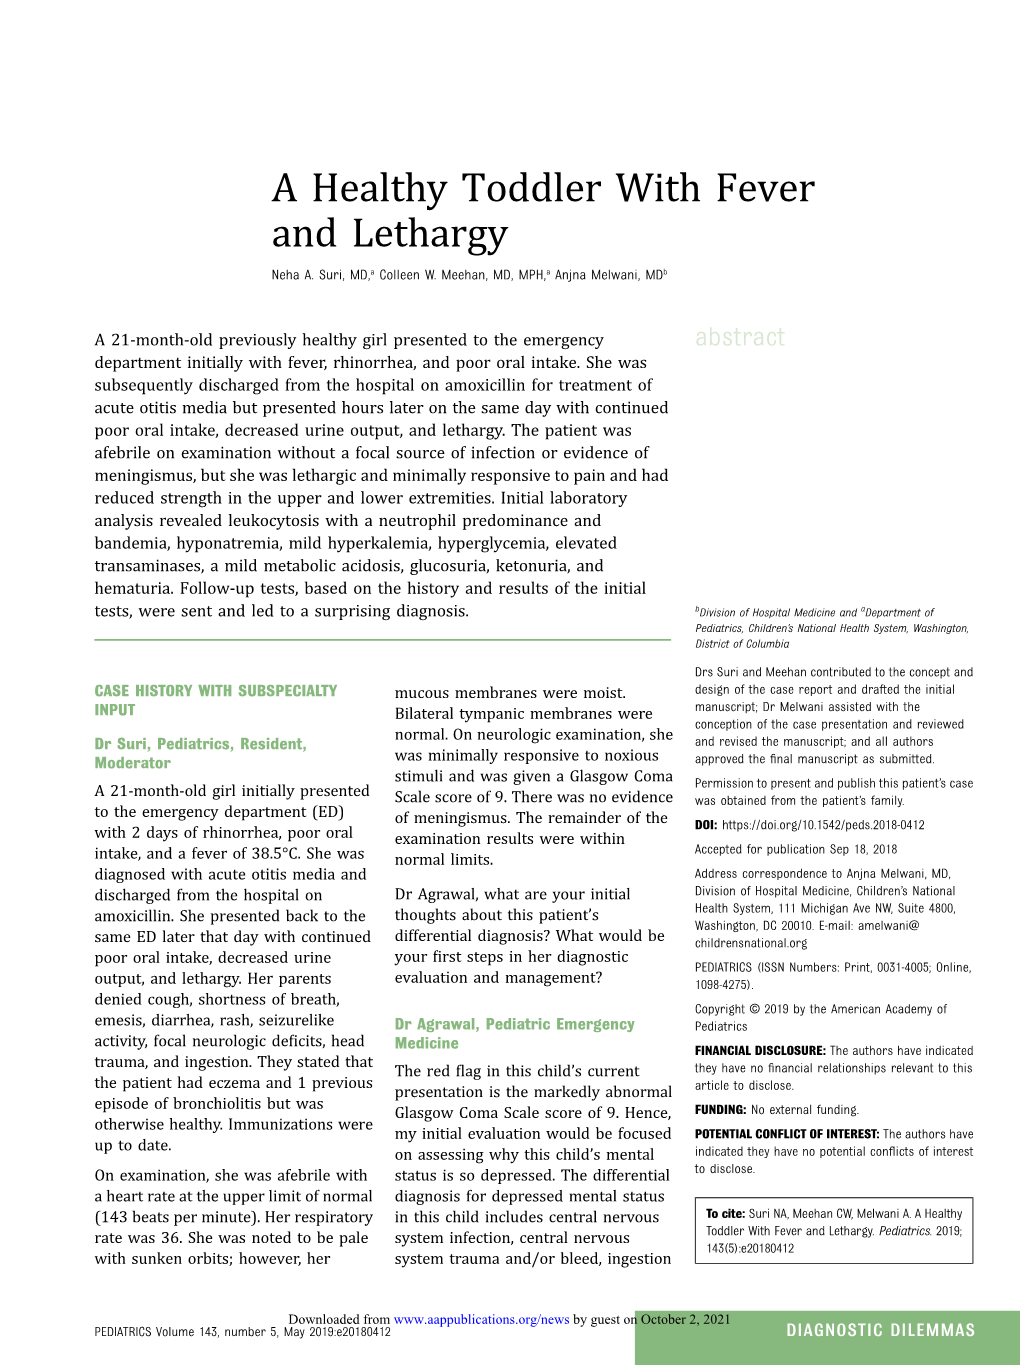 A Healthy Toddler with Fever and Lethargy Neha A